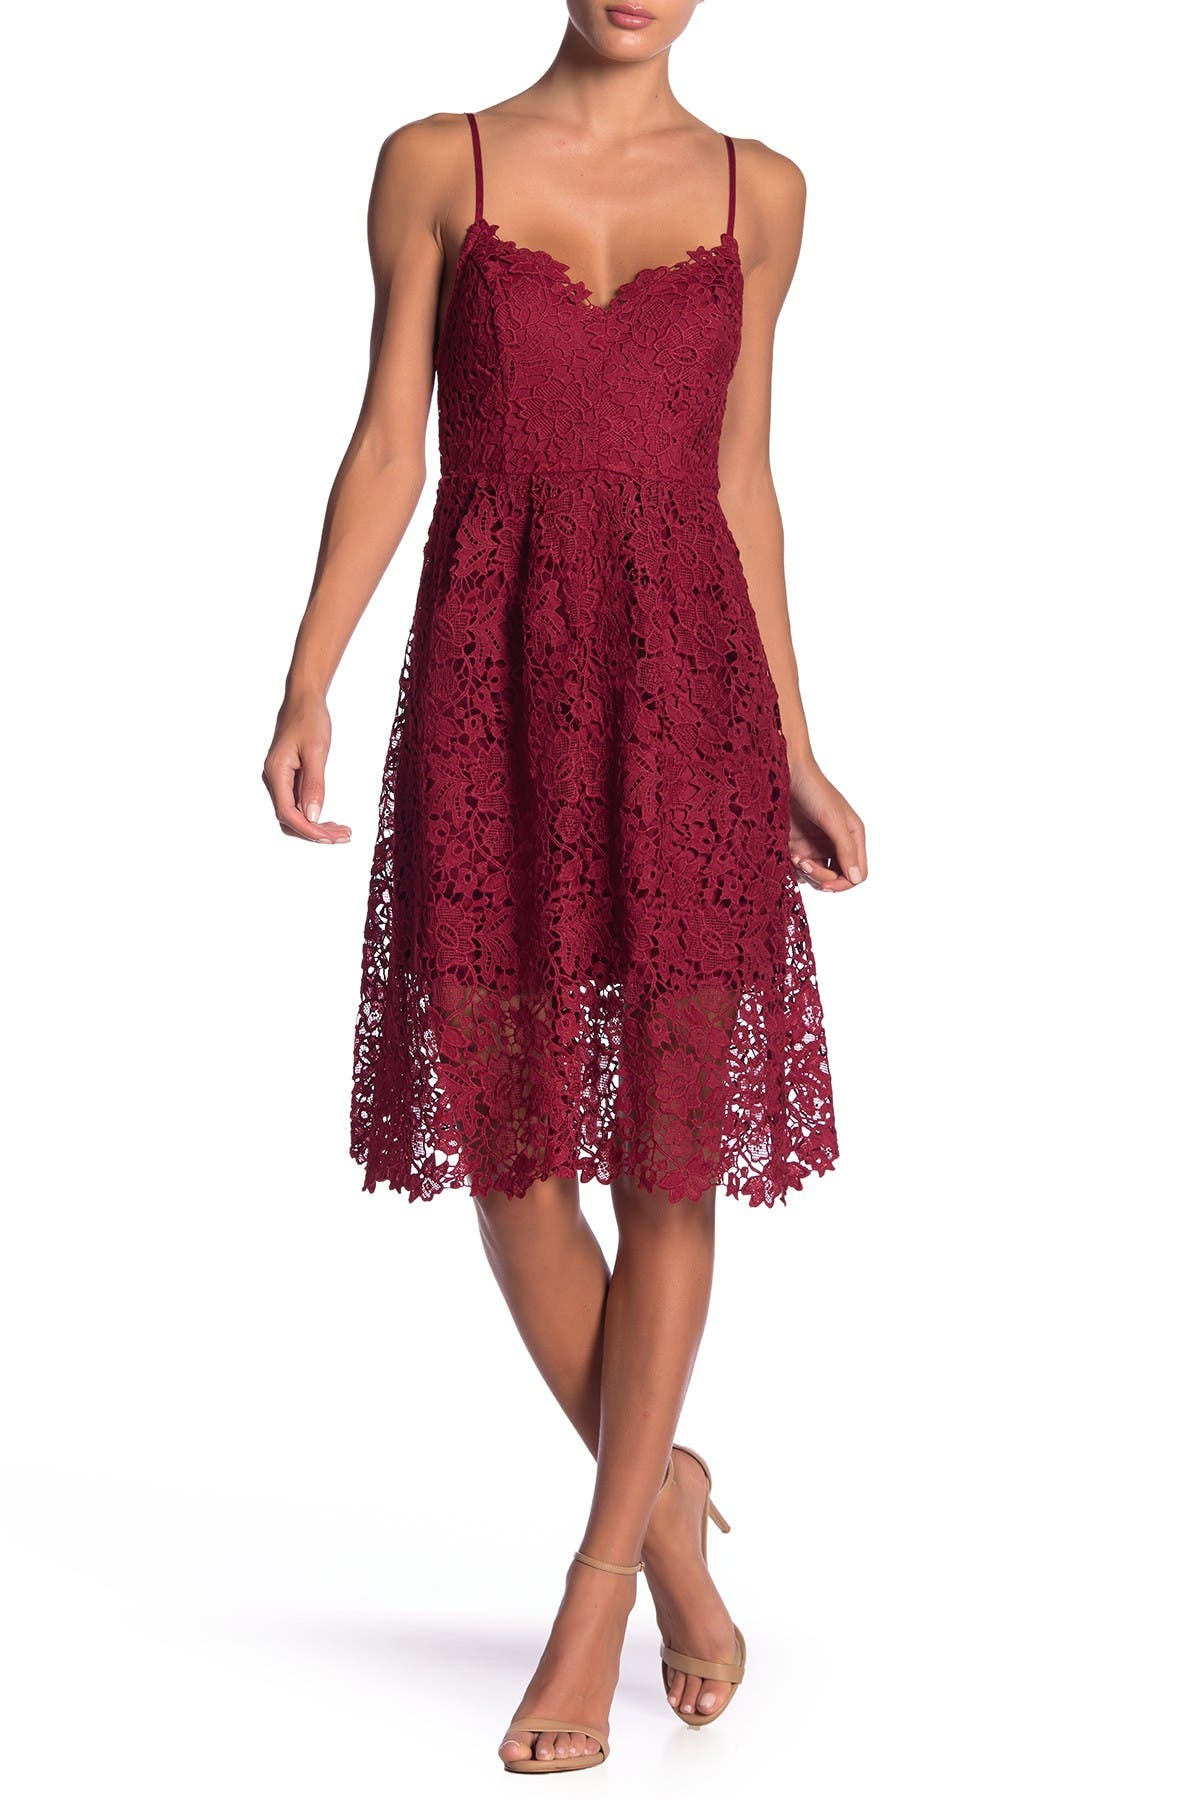 astr red lace dress